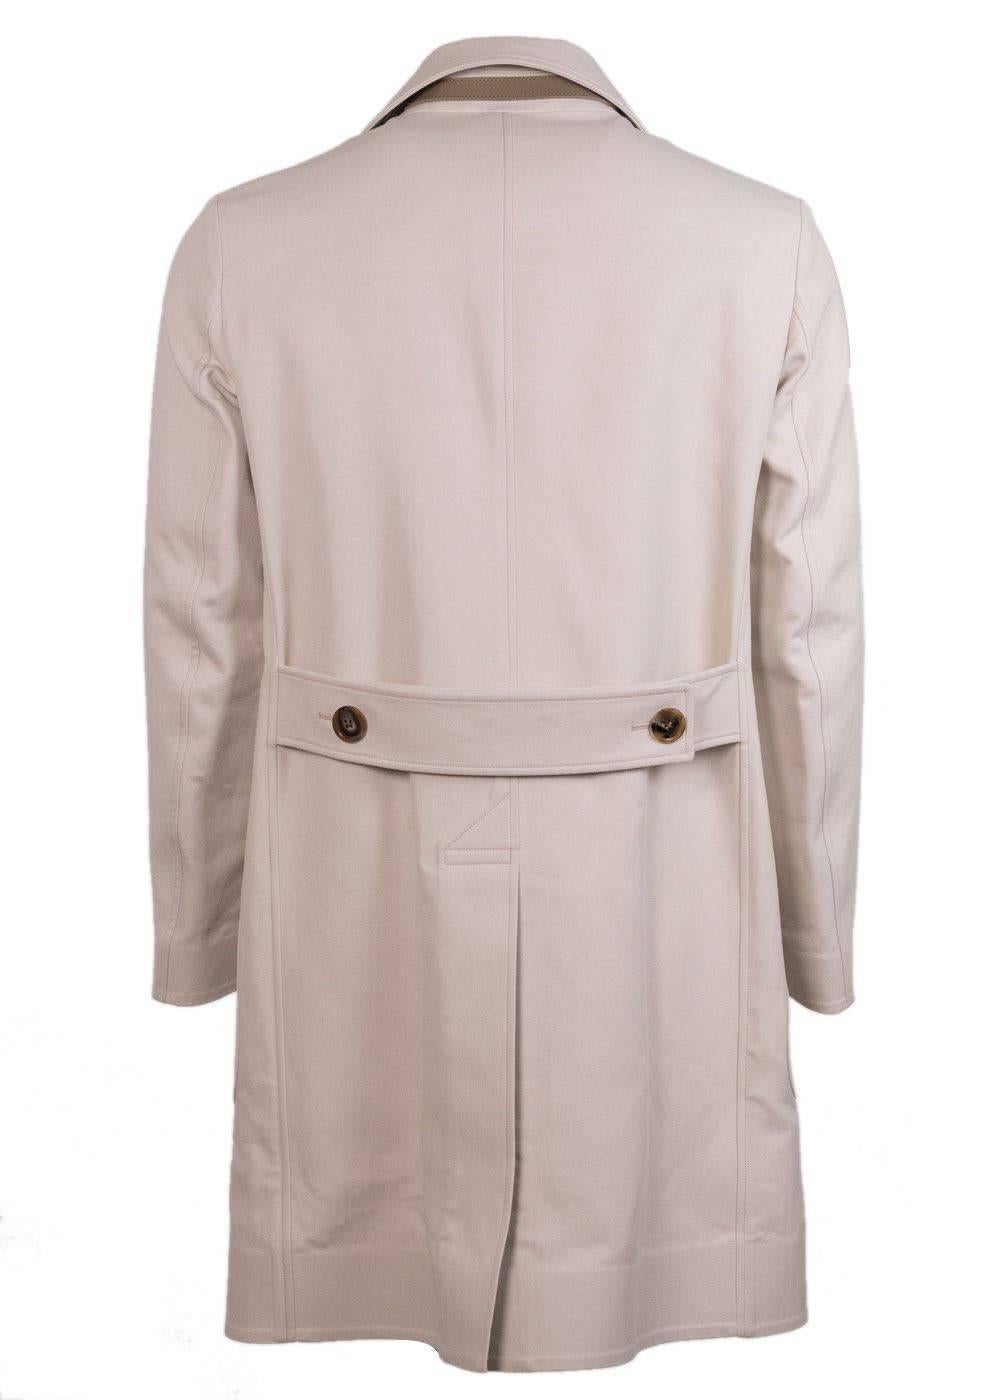 Brand New Tom Ford Cotton Trench Raincoat
Original Tags 7 Hanger Included
Retails In-Stores & Online for $2,295
Size EUR 48 / US 38 Fits True to Size

Embrace all elements in your Tom Ford Trench Style Coat. This coat was designed using durable,